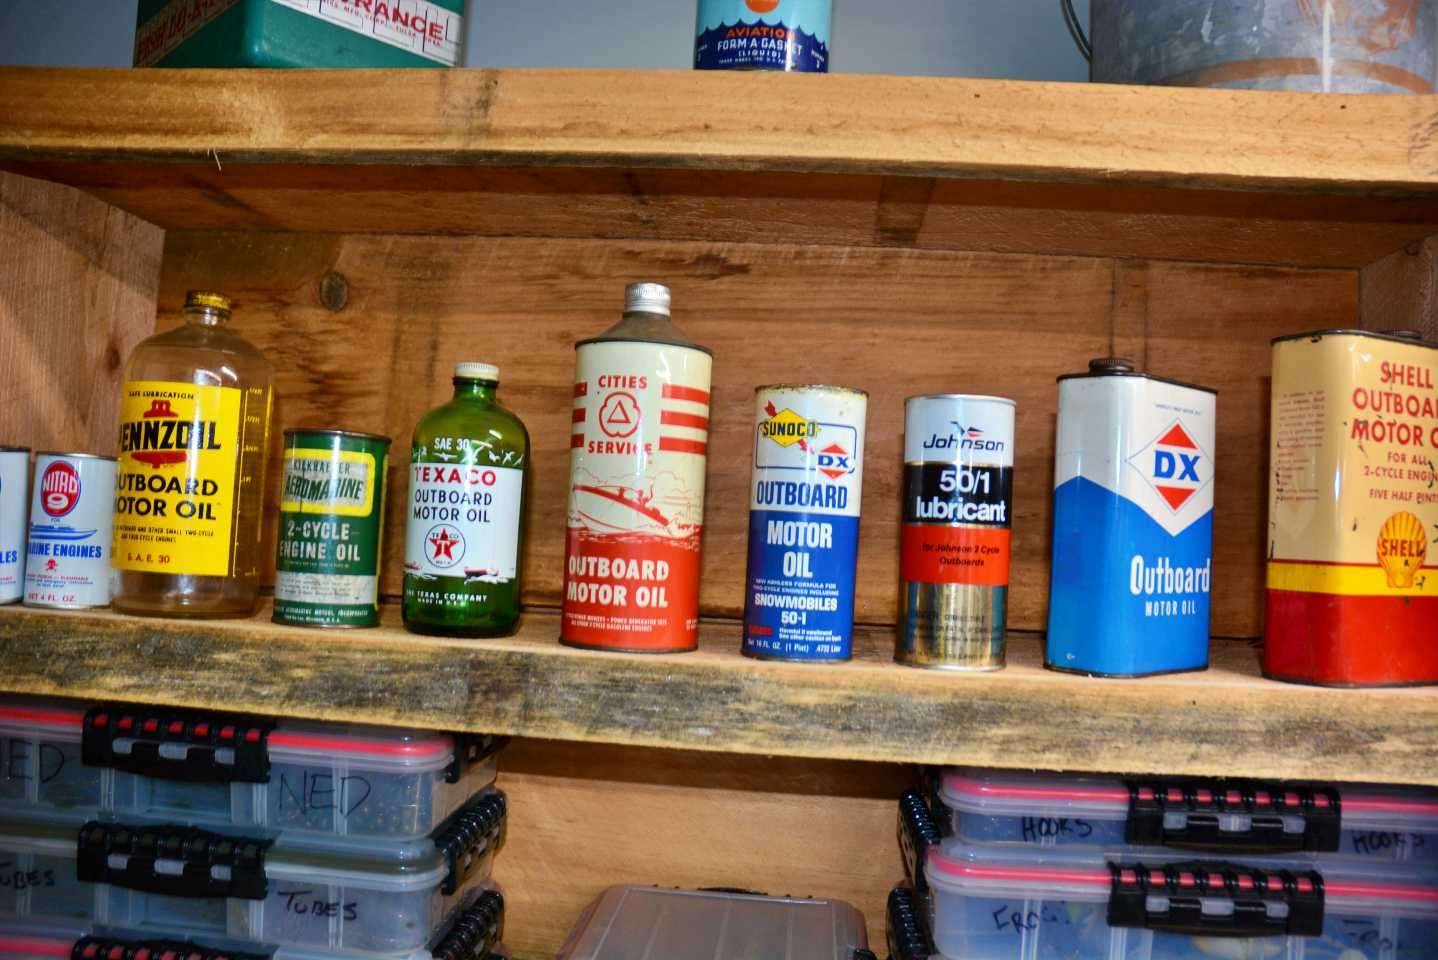 Another shelf filled with vintage oil cans. 